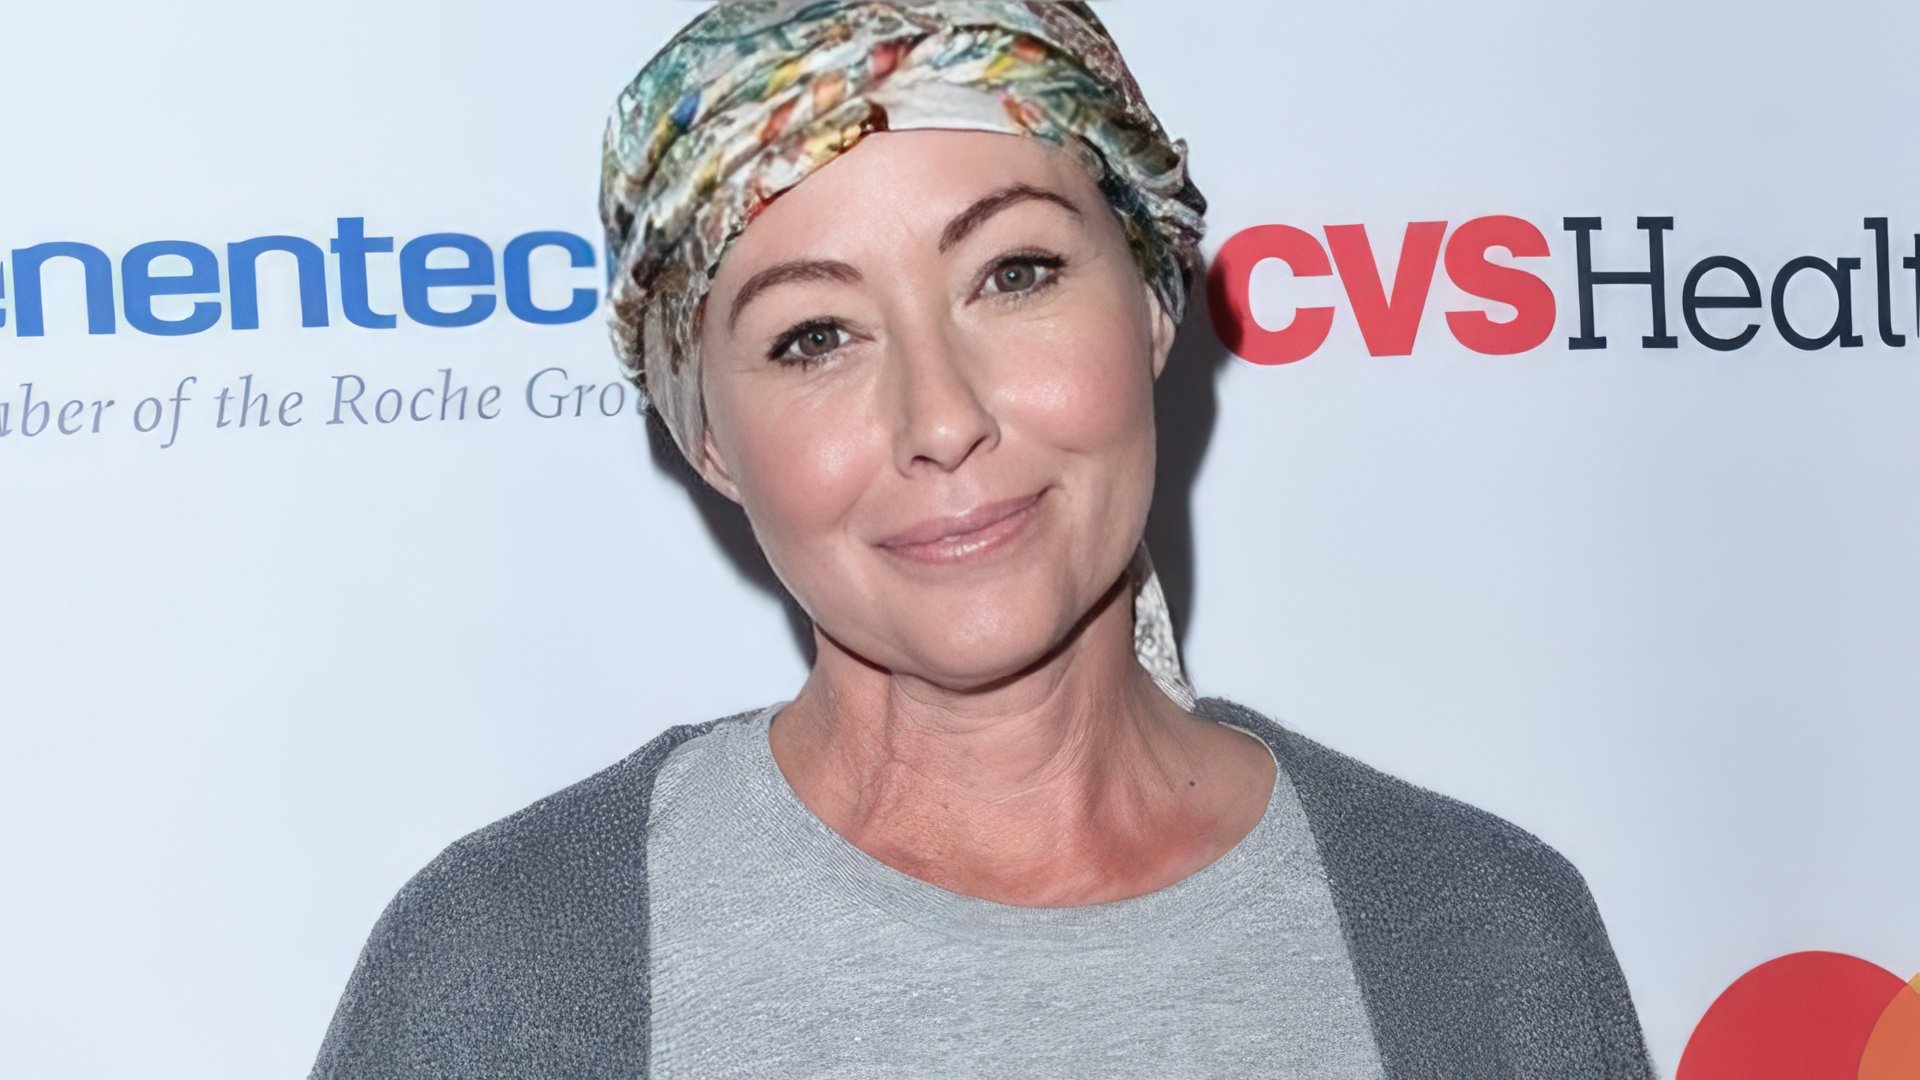 Shannen Doherty was diagnosed with cancer in 2015